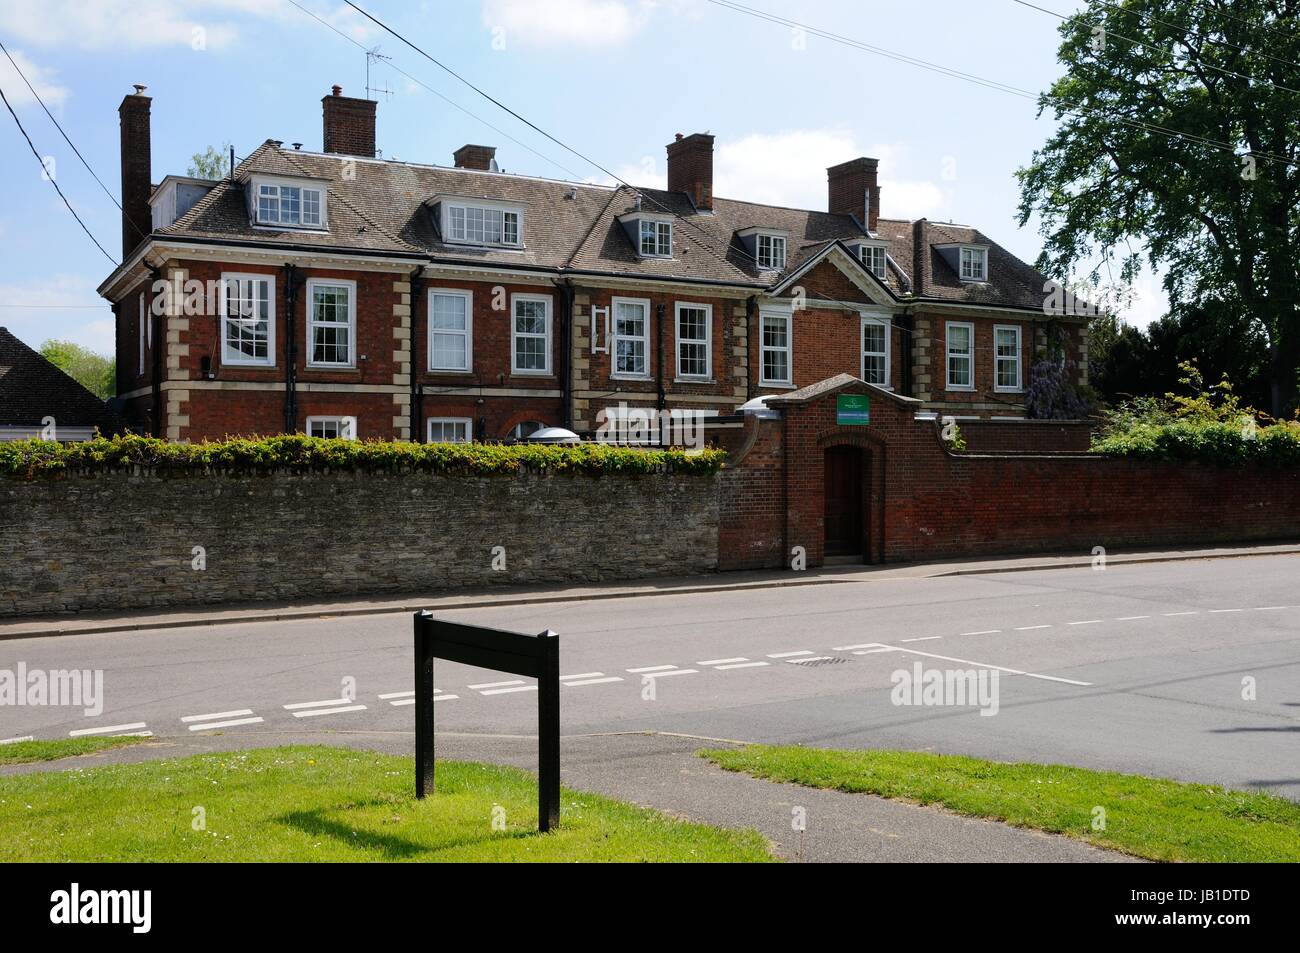 Sharnbrook House, Sharnbrook, Bedfordshire, dates to the early eighteenth century. Stock Photo